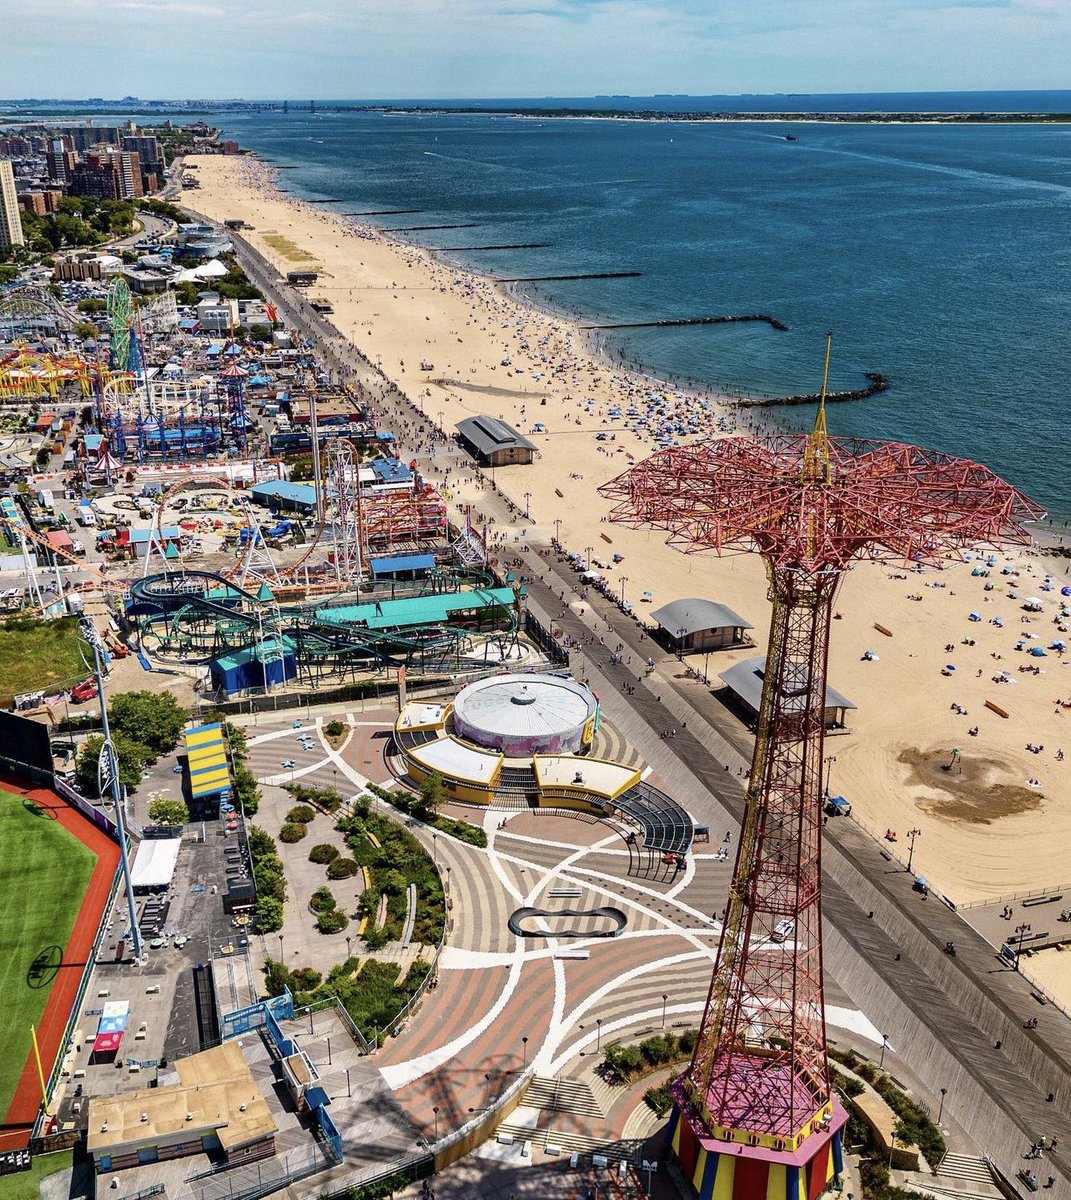 It's going to be hot today 🌡️ Time to hit the beach 🏖️ 📷 @mingomatic #coneyisland